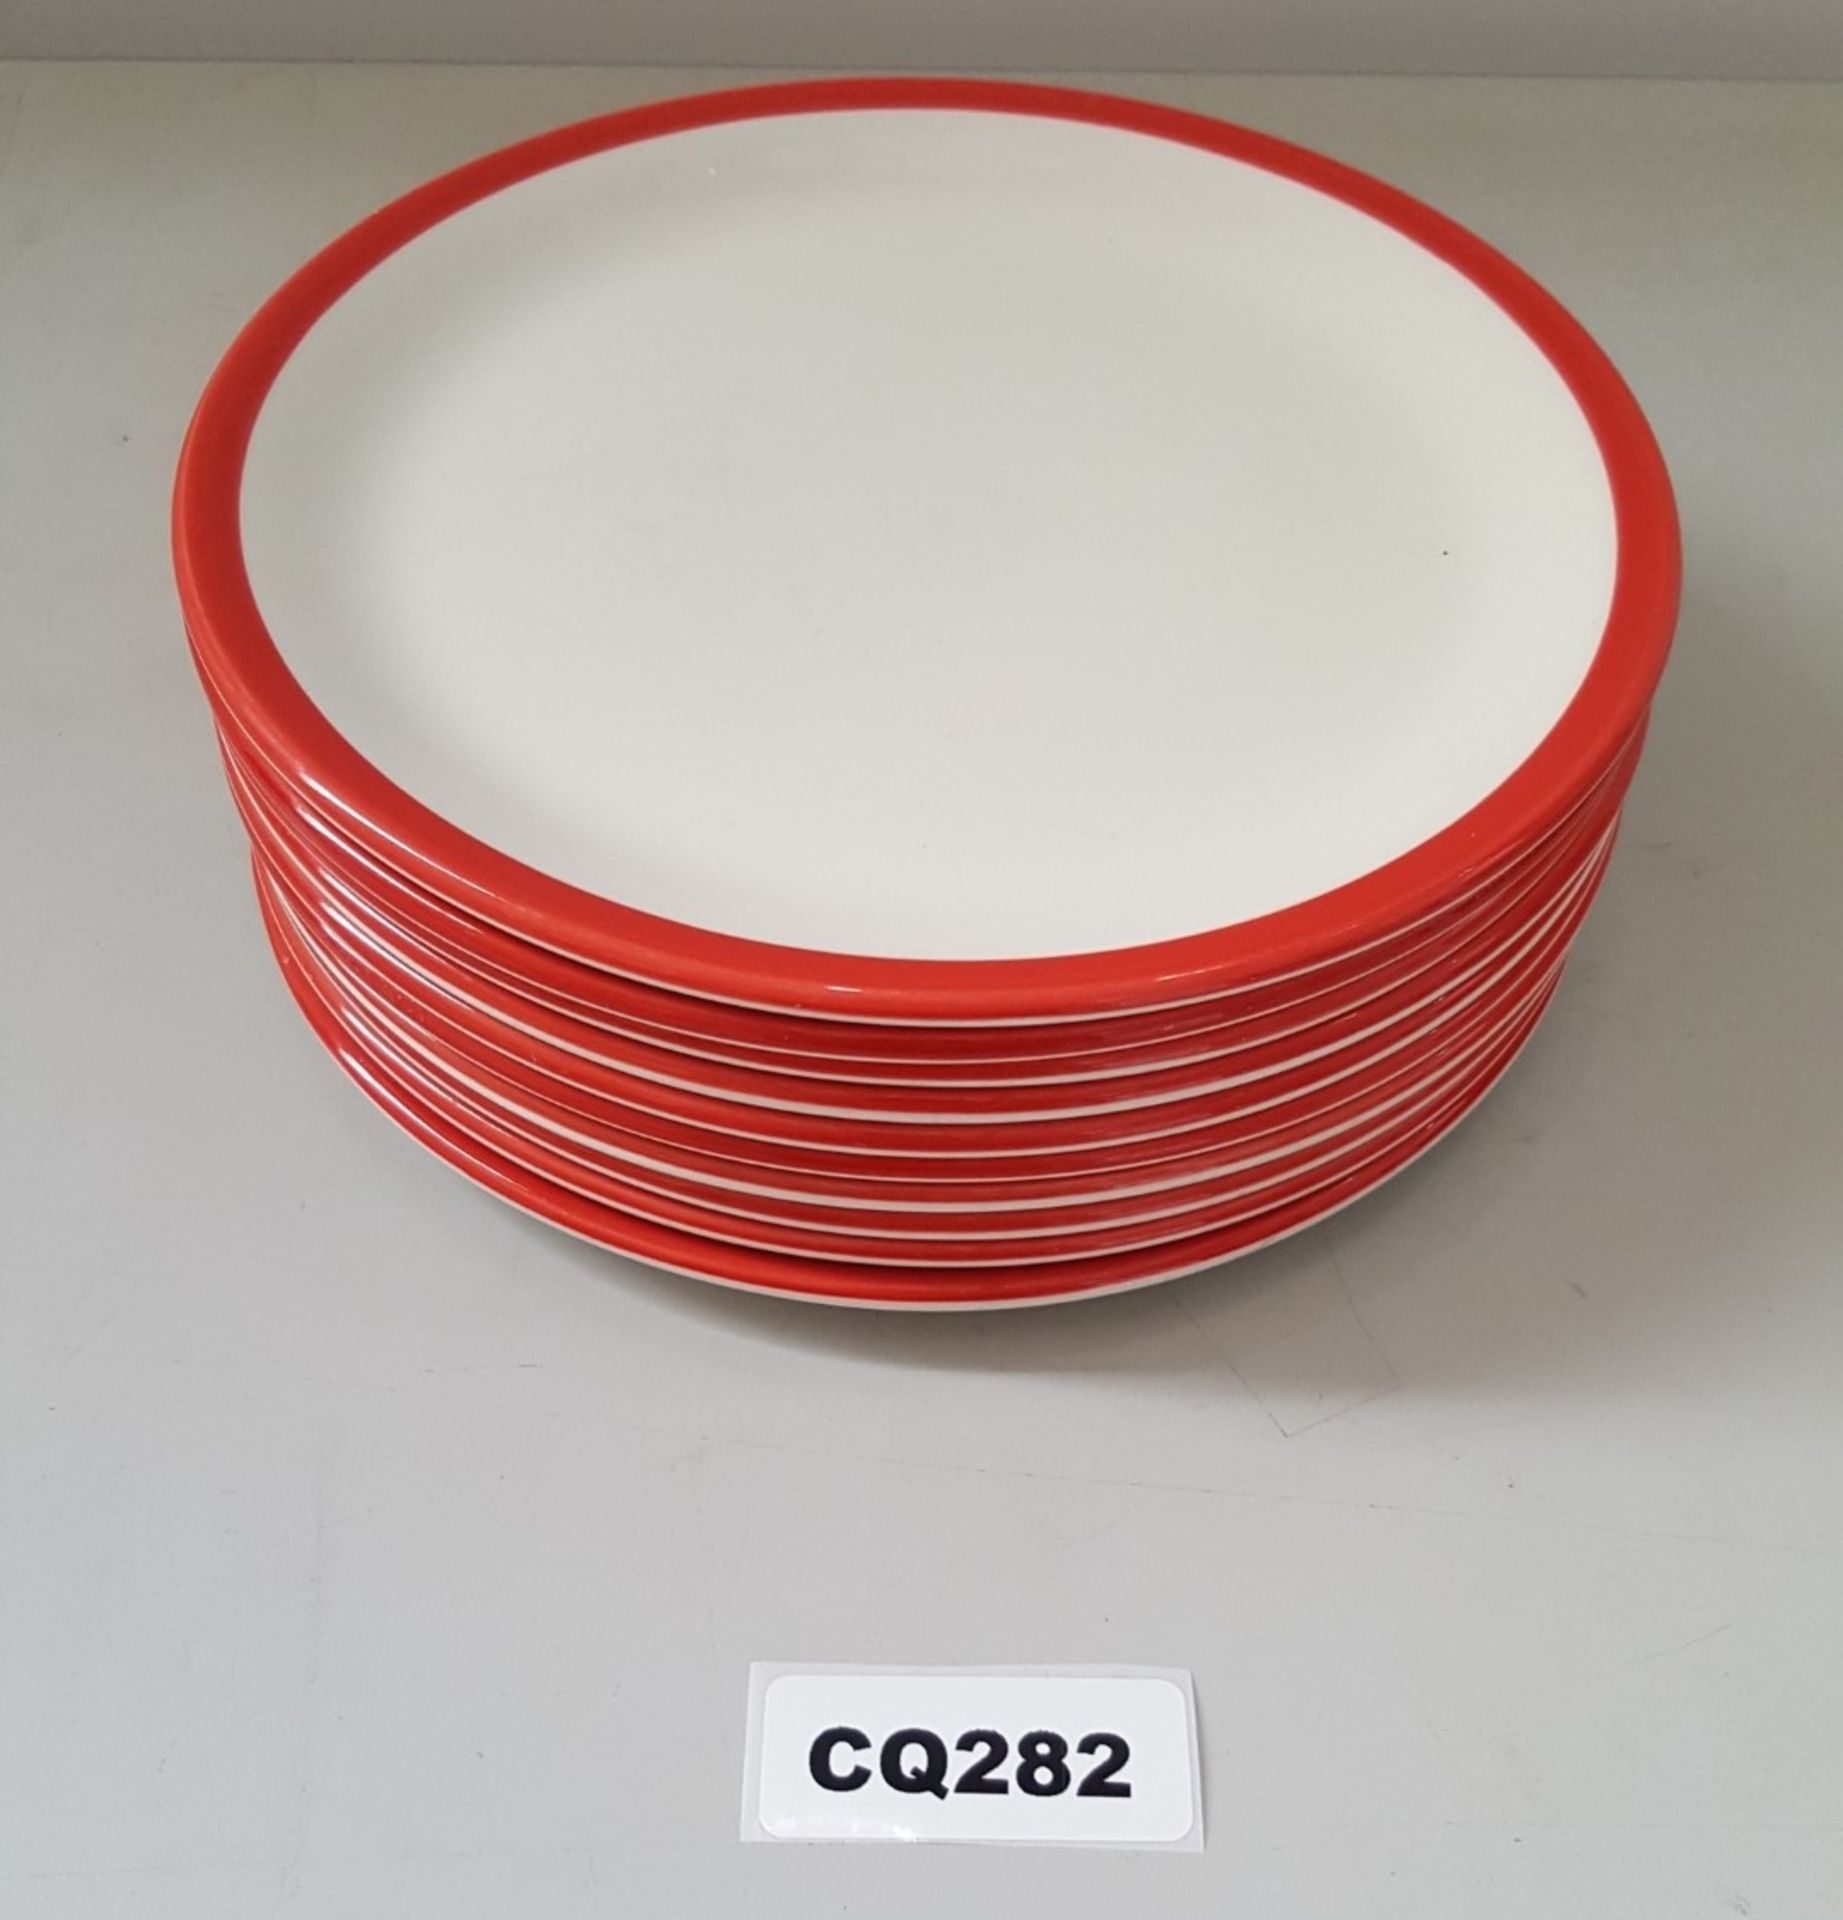 10 x Steelite Coupe Plates White With Red Outline Egde 20CM - Ref CQ282